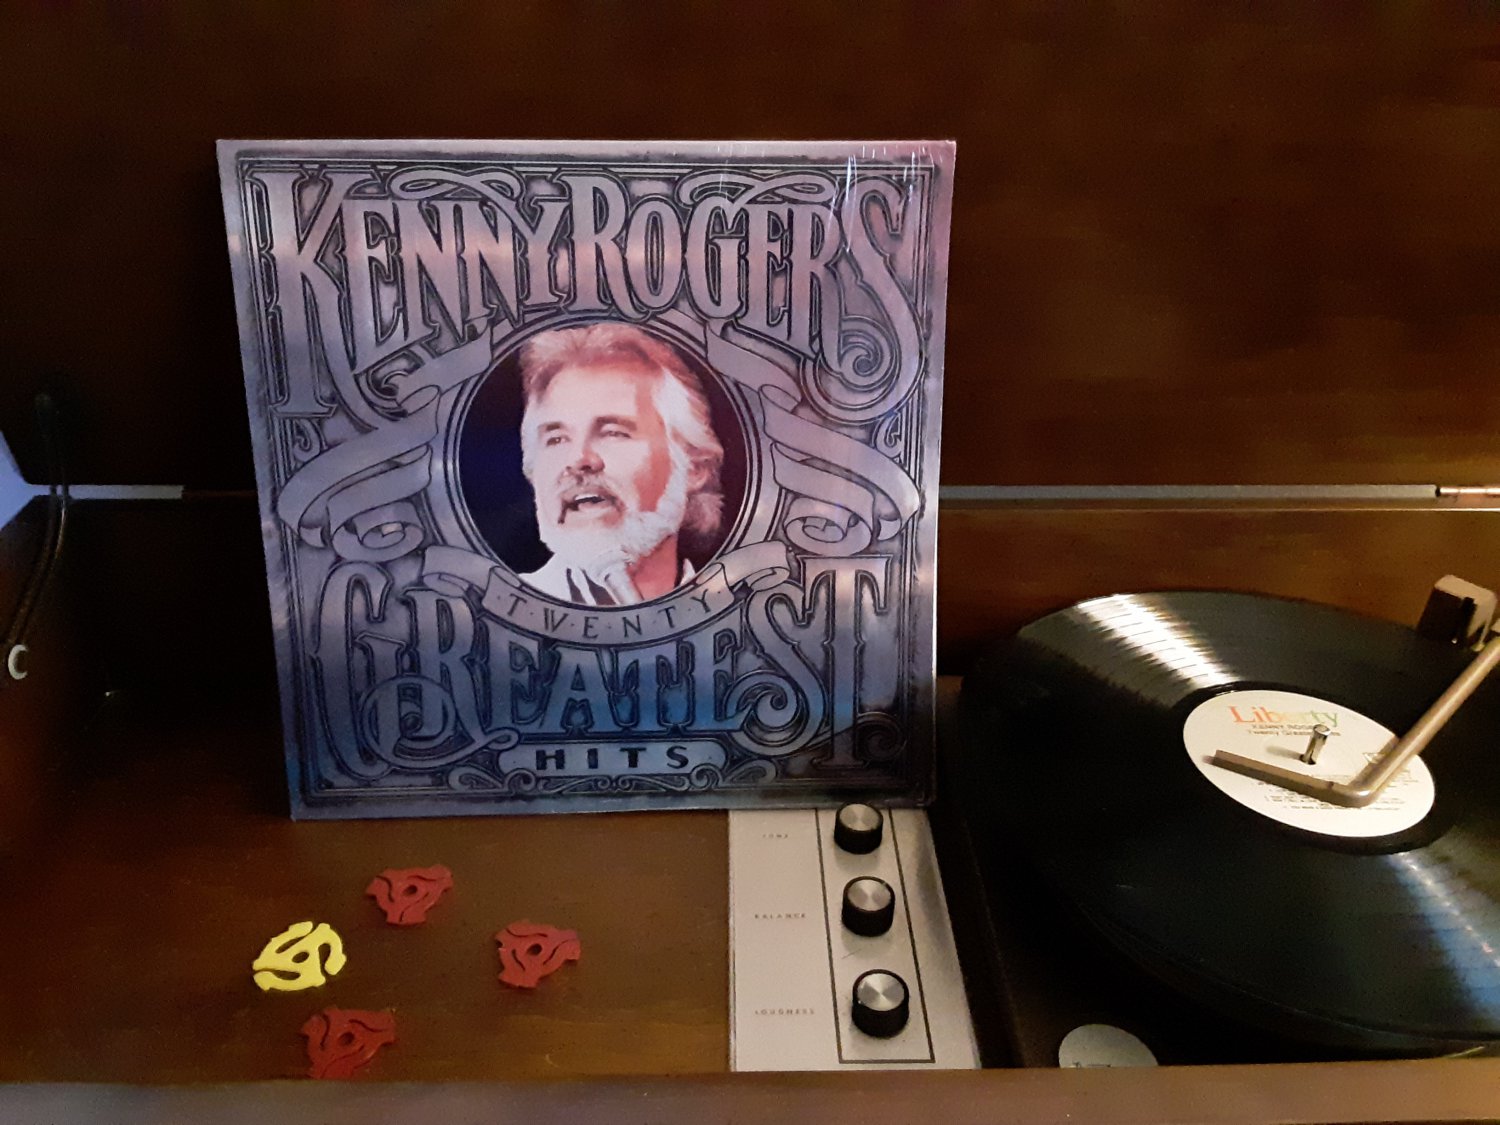 Kenny Rogers - 20 Greatest Hits - Circa 1983